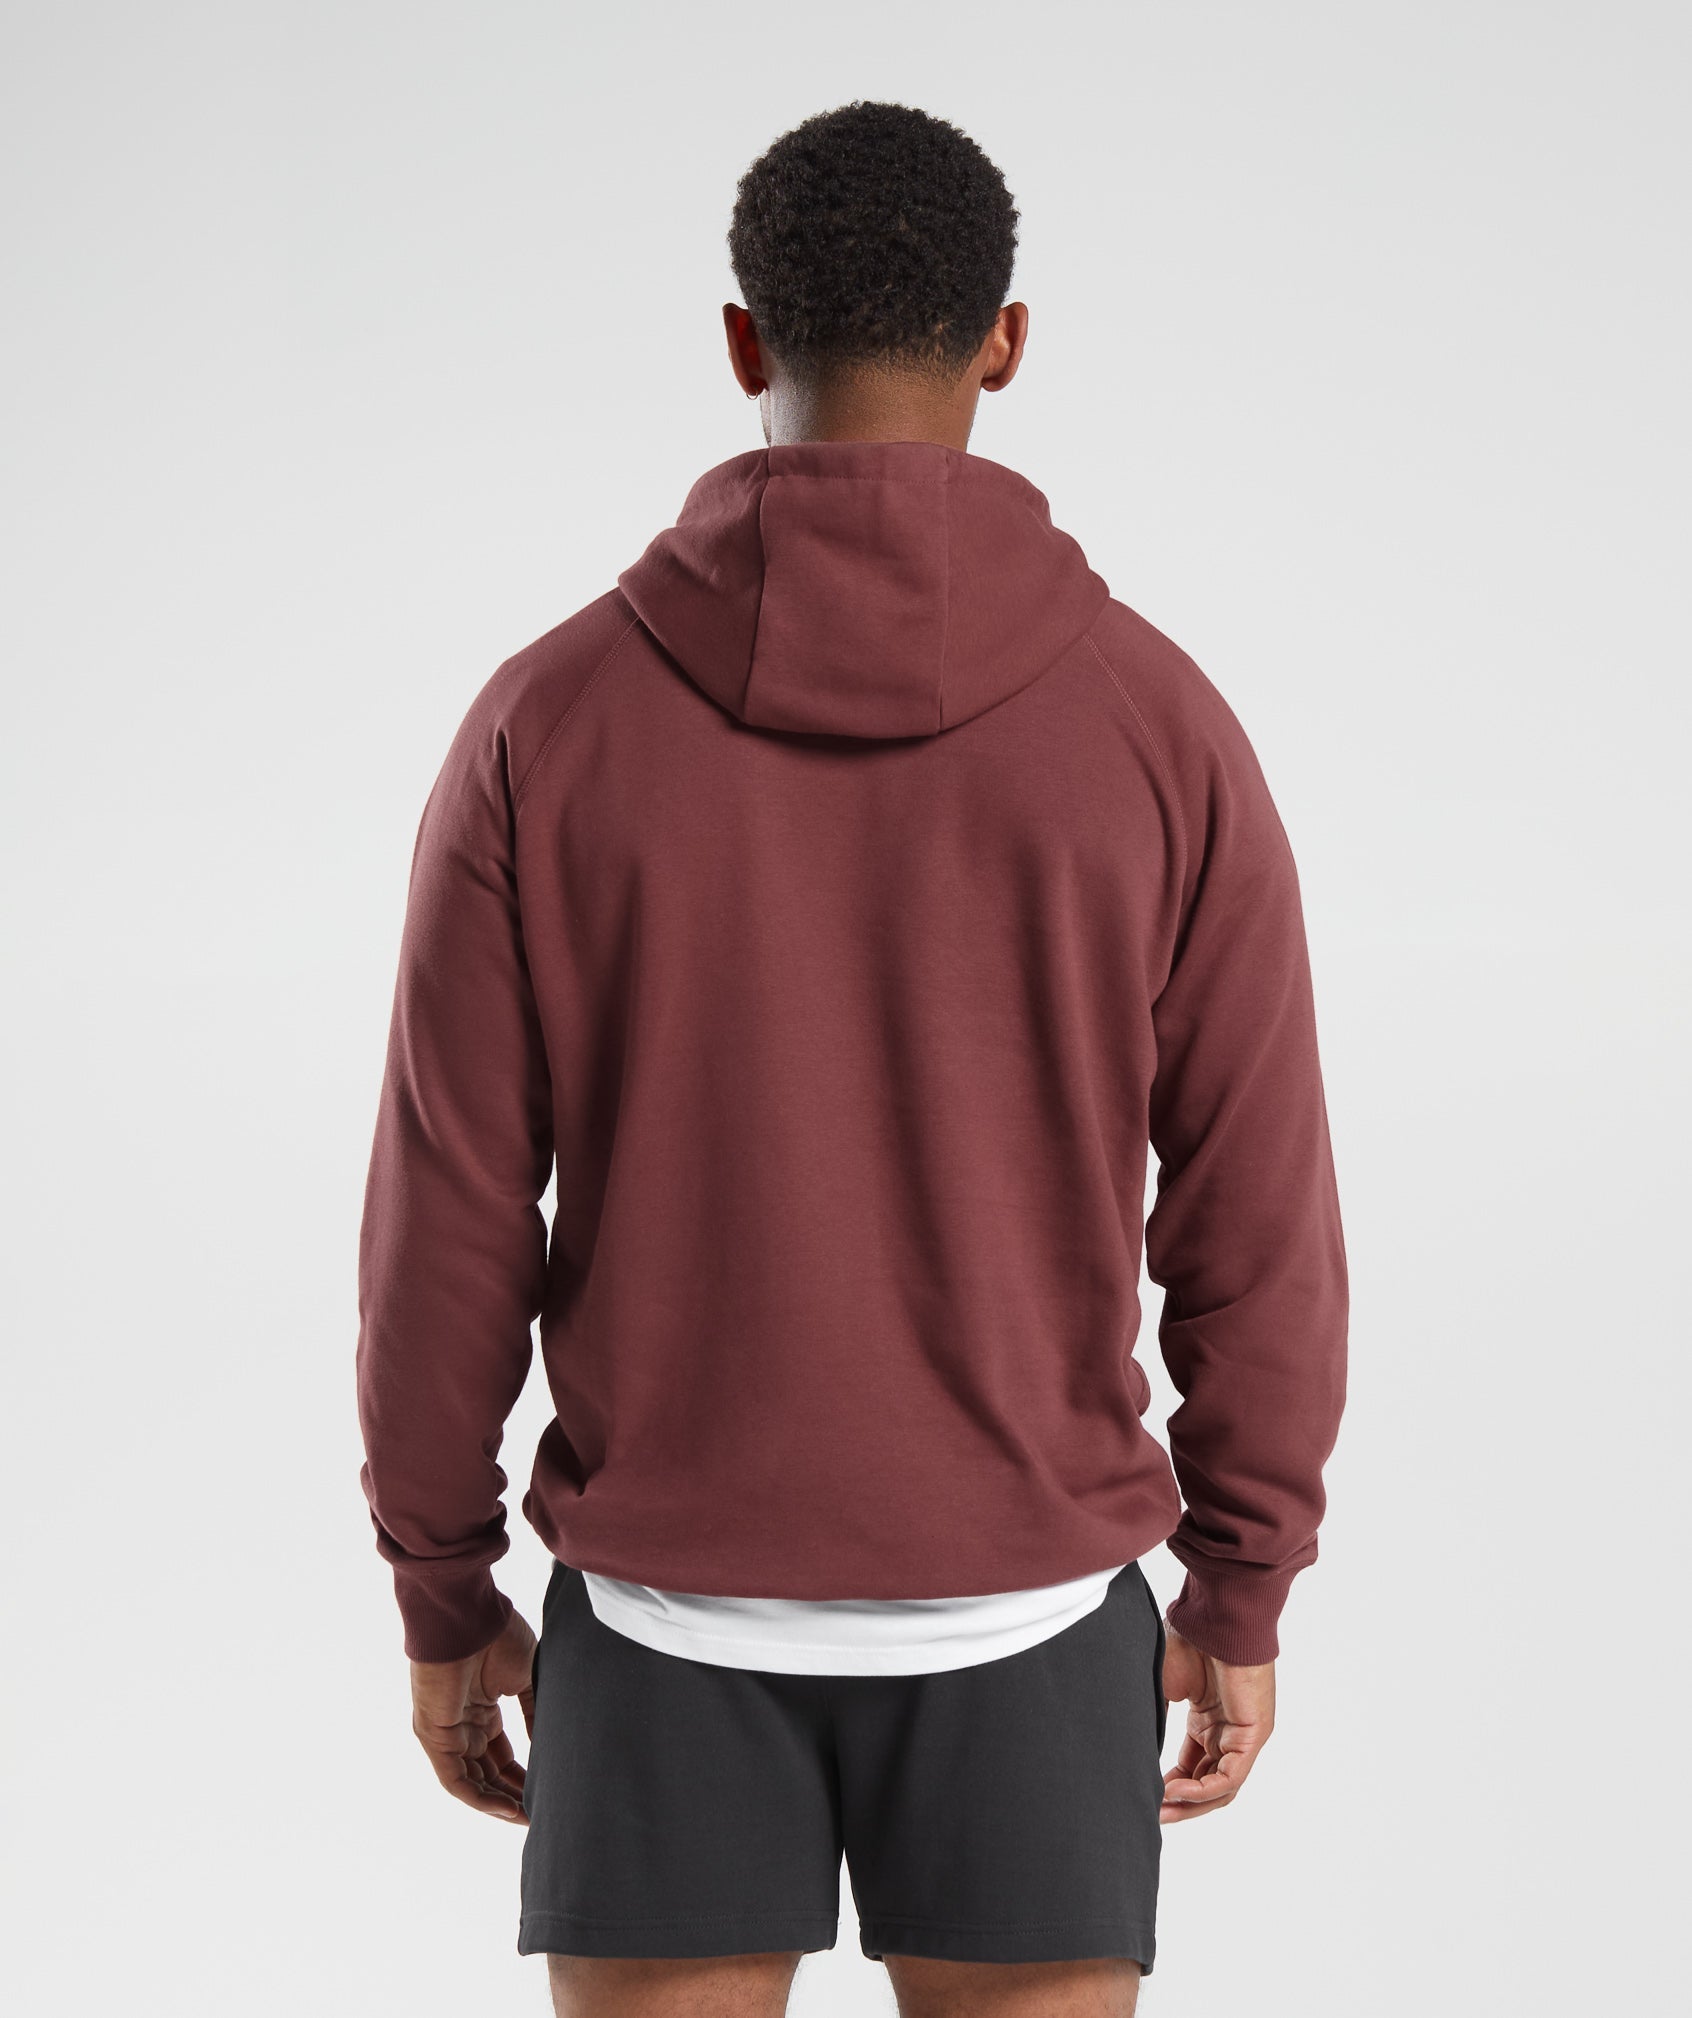 Crest Hoodie in Washed Burgundy - view 2